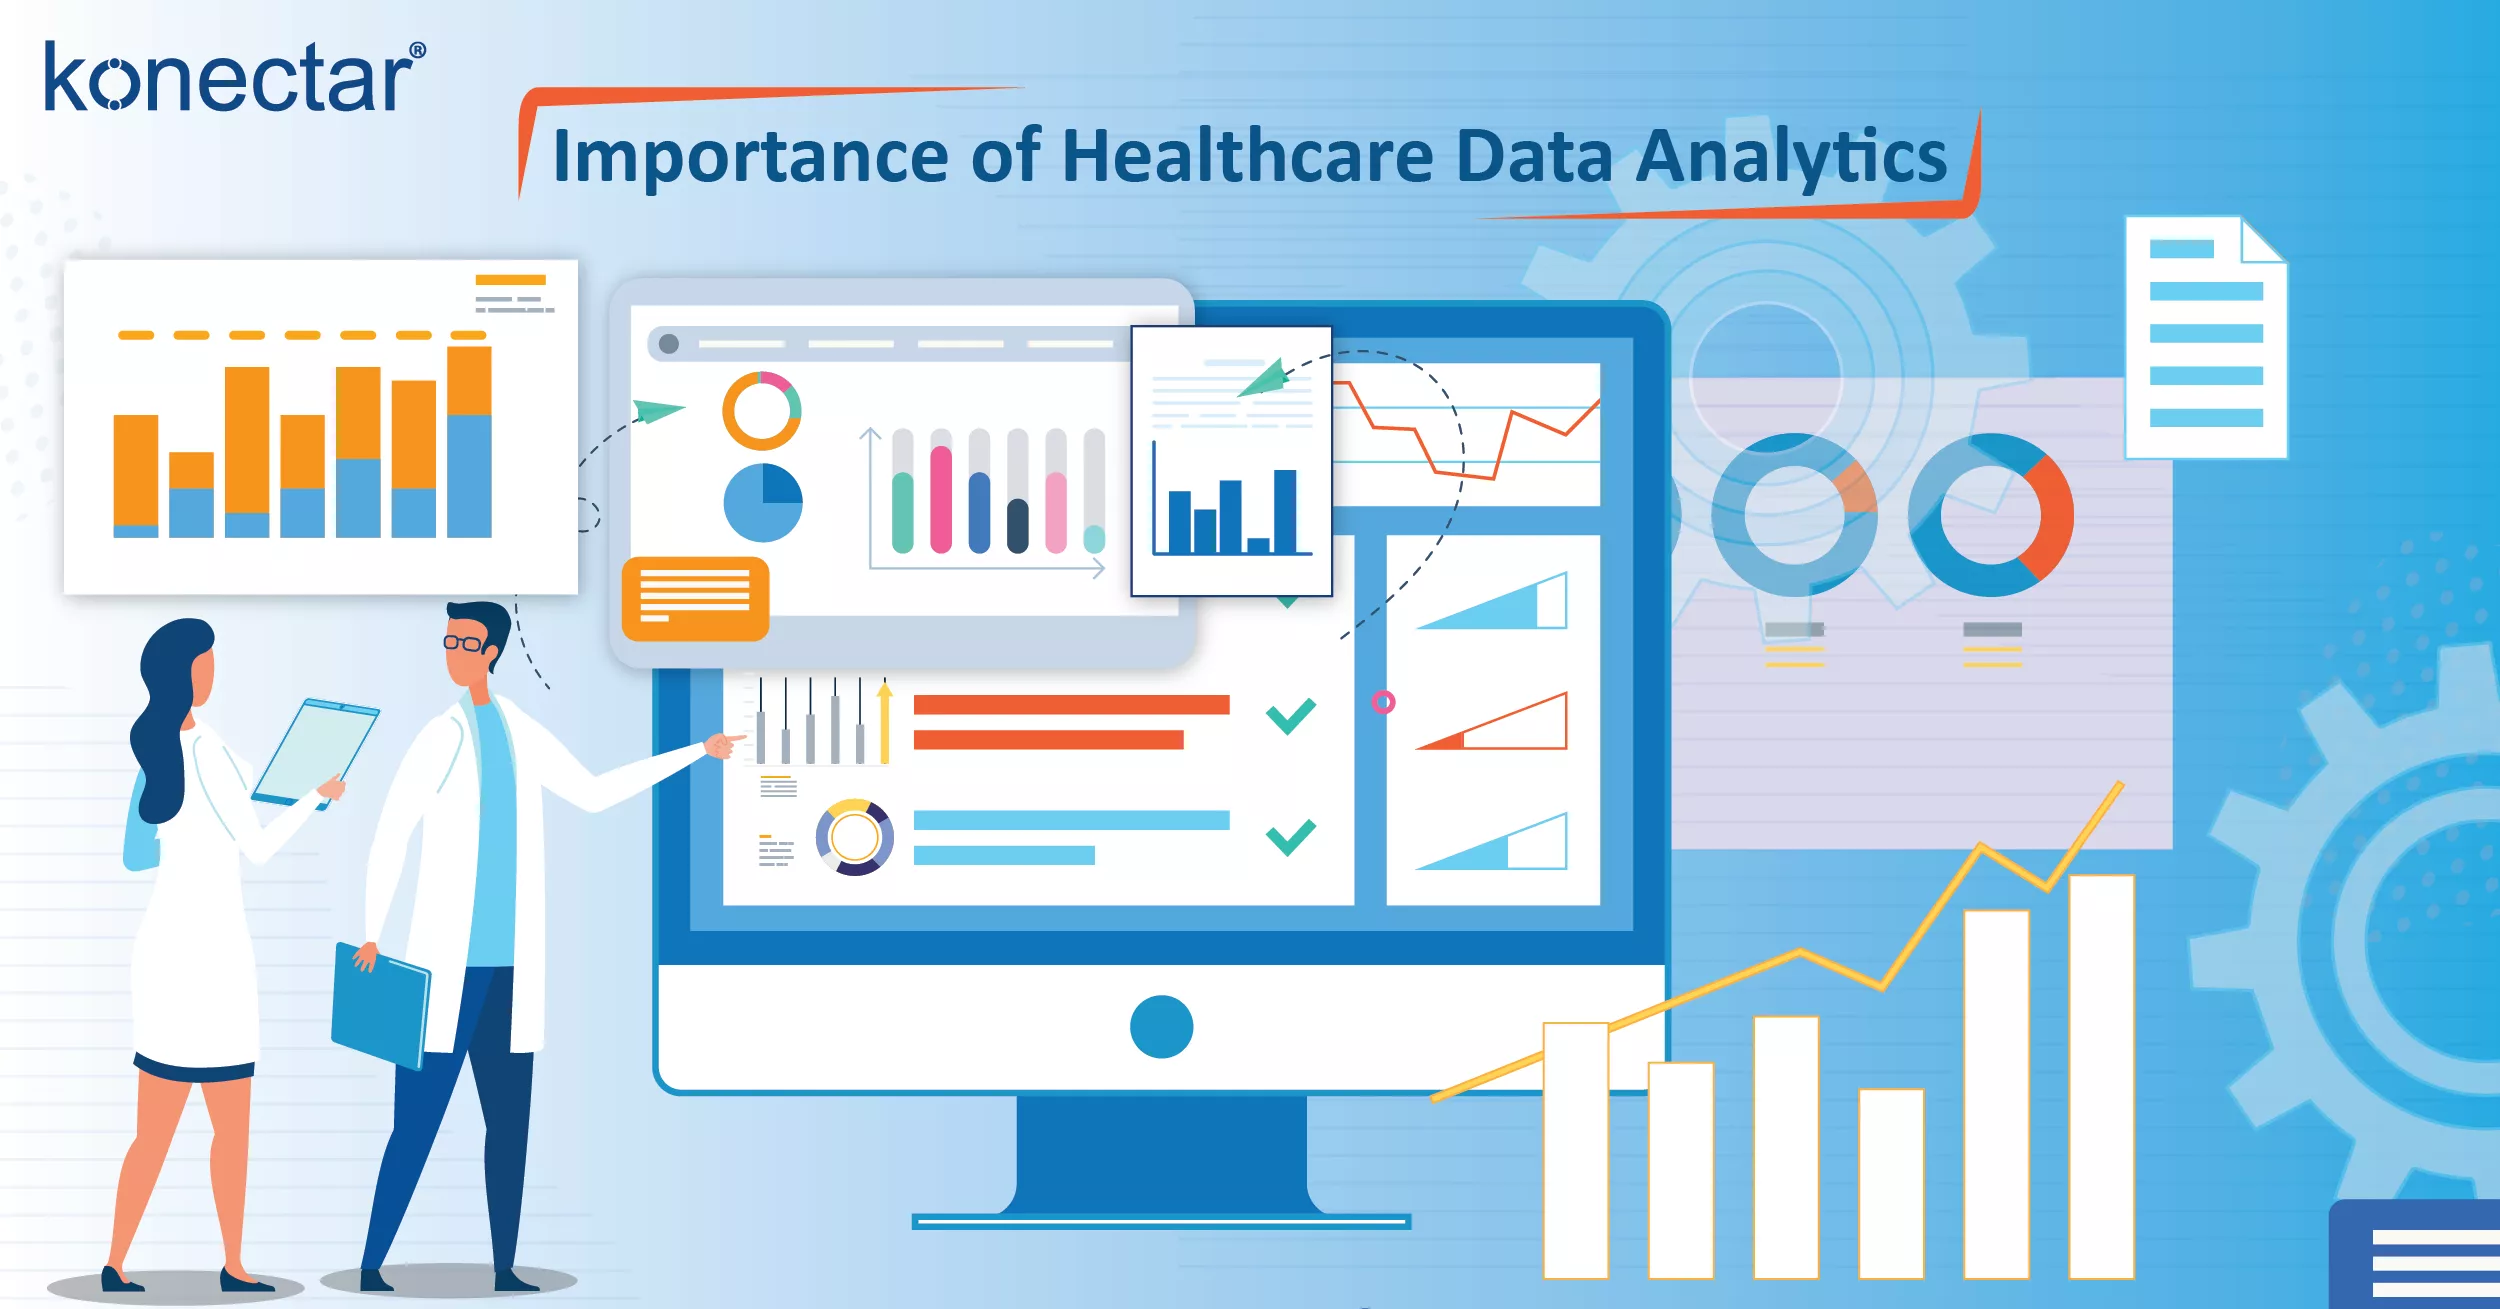 The Importance of Healthcare Data Analytics